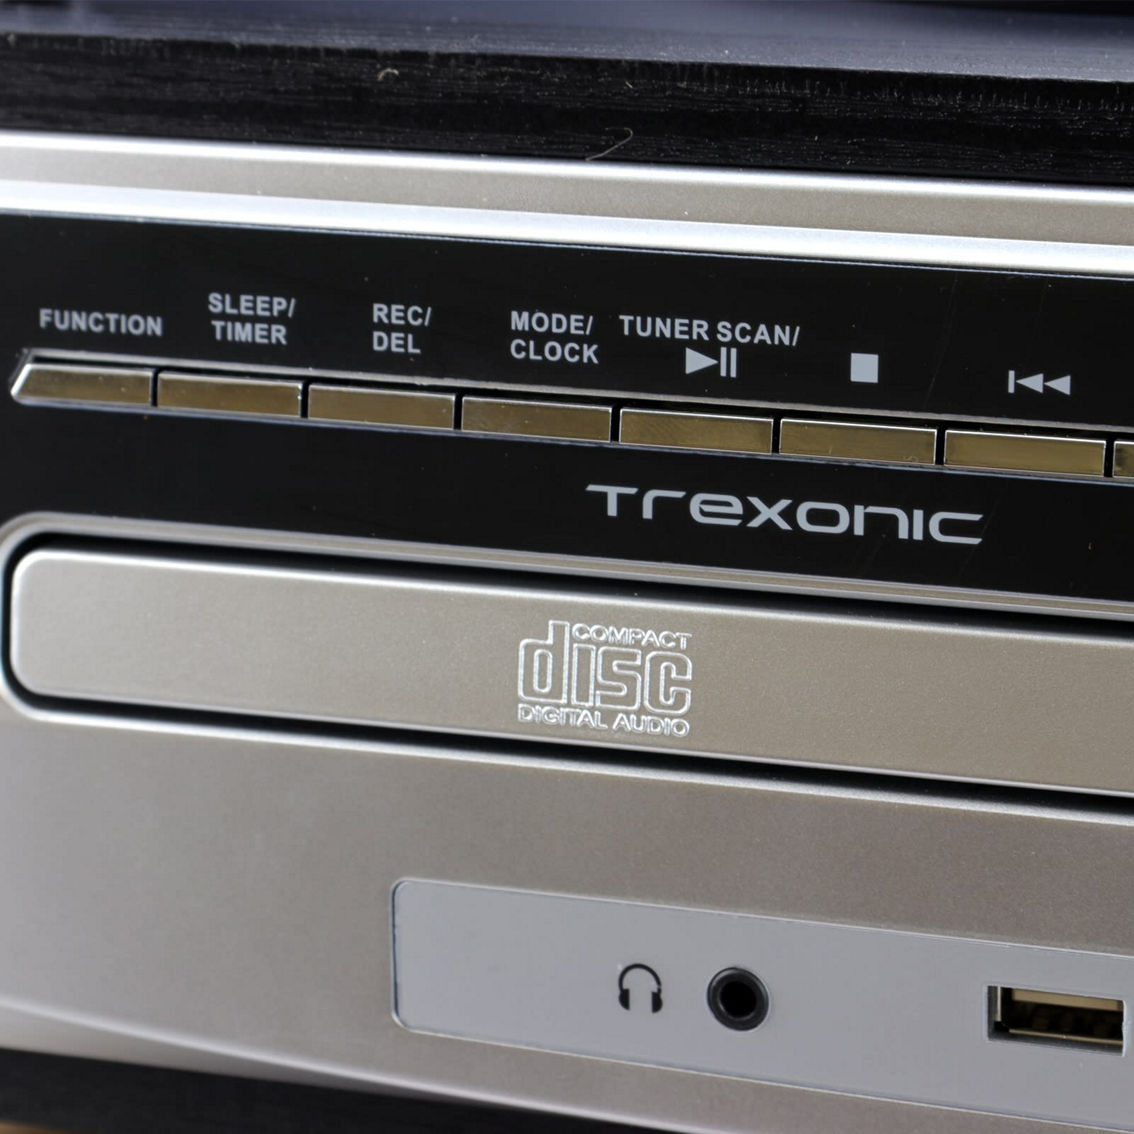 Trexonic 3-Speed Vinyl Turntable Home Stereo System with CD Player, FM Radio, Bl - Image 2 of 5